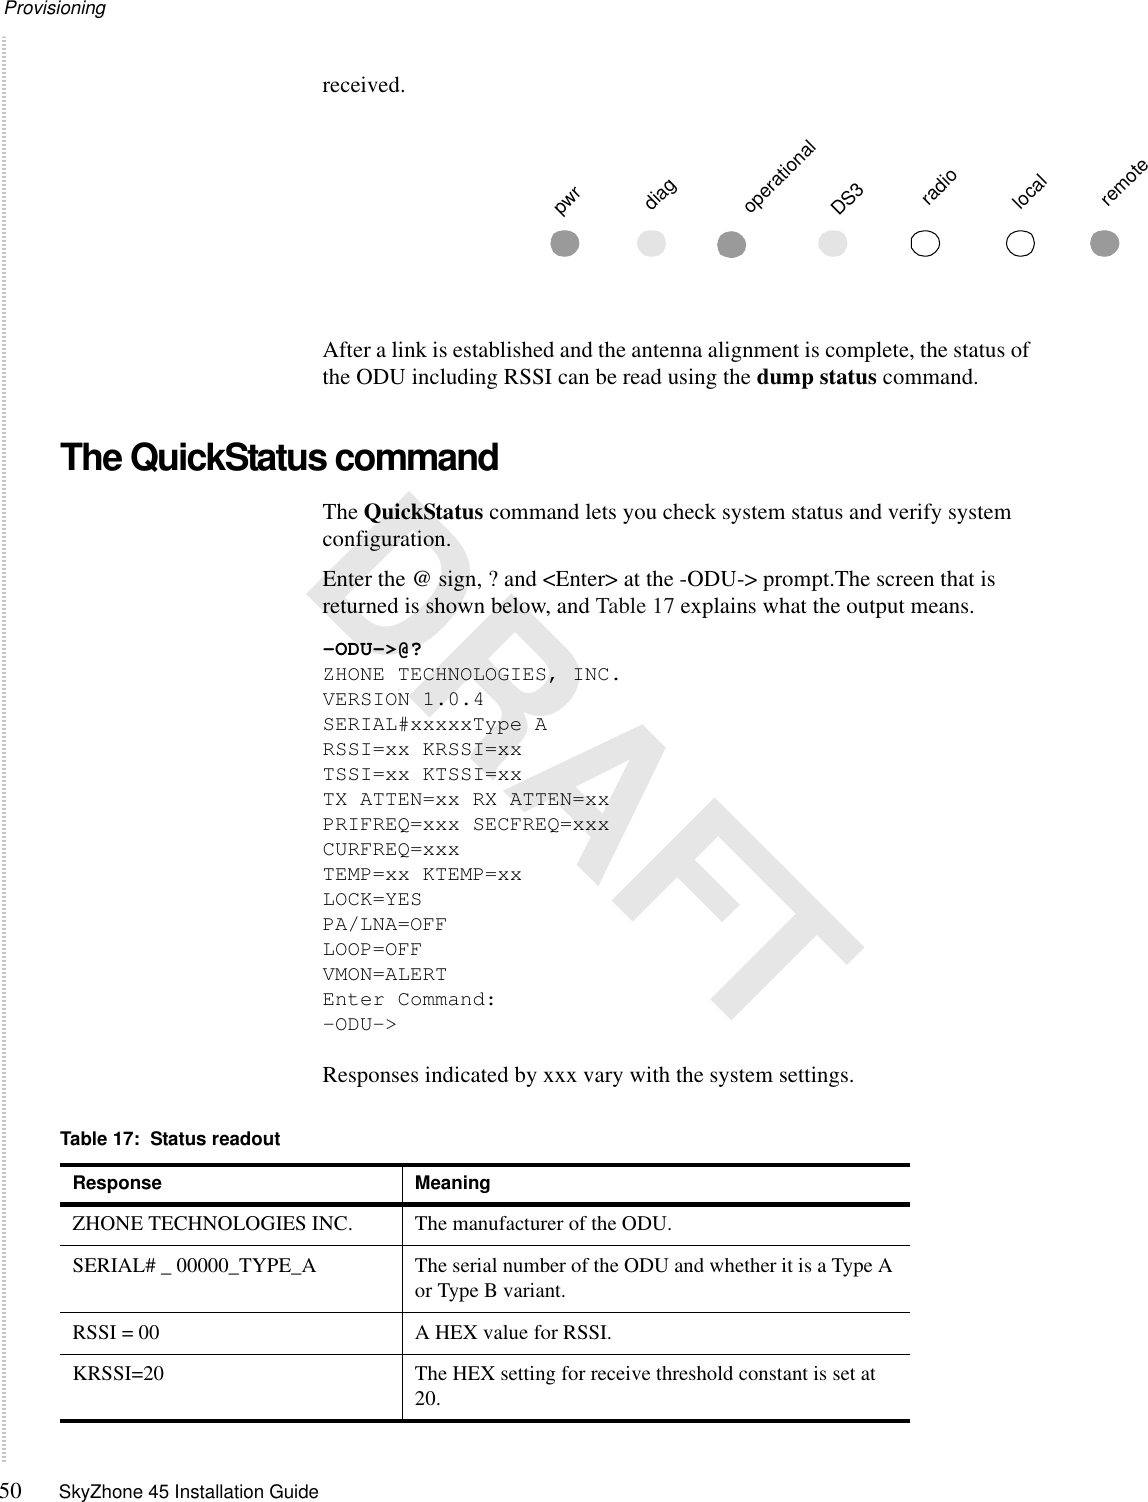 Provisioning50 SkyZhone 45 Installation Guide DRAFTreceived.After a link is established and the antenna alignment is complete, the status of the ODU including RSSI can be read using the dump status command.The QuickStatus commandThe QuickStatus command lets you check system status and verify system configuration.Enter the @ sign, ? and &lt;Enter&gt; at the -ODU-&gt; prompt.The screen that is returned is shown below, and Table 17 explains what the output means.-ODU-&gt;@?ZHONE TECHNOLOGIES, INC.VERSION 1.0.4SERIAL#xxxxxType ARSSI=xx KRSSI=xxTSSI=xx KTSSI=xxTX ATTEN=xx RX ATTEN=xxPRIFREQ=xxx SECFREQ=xxxCURFREQ=xxxTEMP=xx KTEMP=xxLOCK=YESPA/LNA=OFFLOOP=OFFVMON=ALERTEnter Command:-ODU-&gt;Responses indicated by xxx vary with the system settings.pwrdiagoperational DS3radiolocalremoteTable 17:  Status readoutResponse MeaningZHONE TECHNOLOGIES INC. The manufacturer of the ODU.SERIAL# _ 00000_TYPE_A The serial number of the ODU and whether it is a Type A or Type B variant.RSSI = 00  A HEX value for RSSI.KRSSI=20 The HEX setting for receive threshold constant is set at 20.